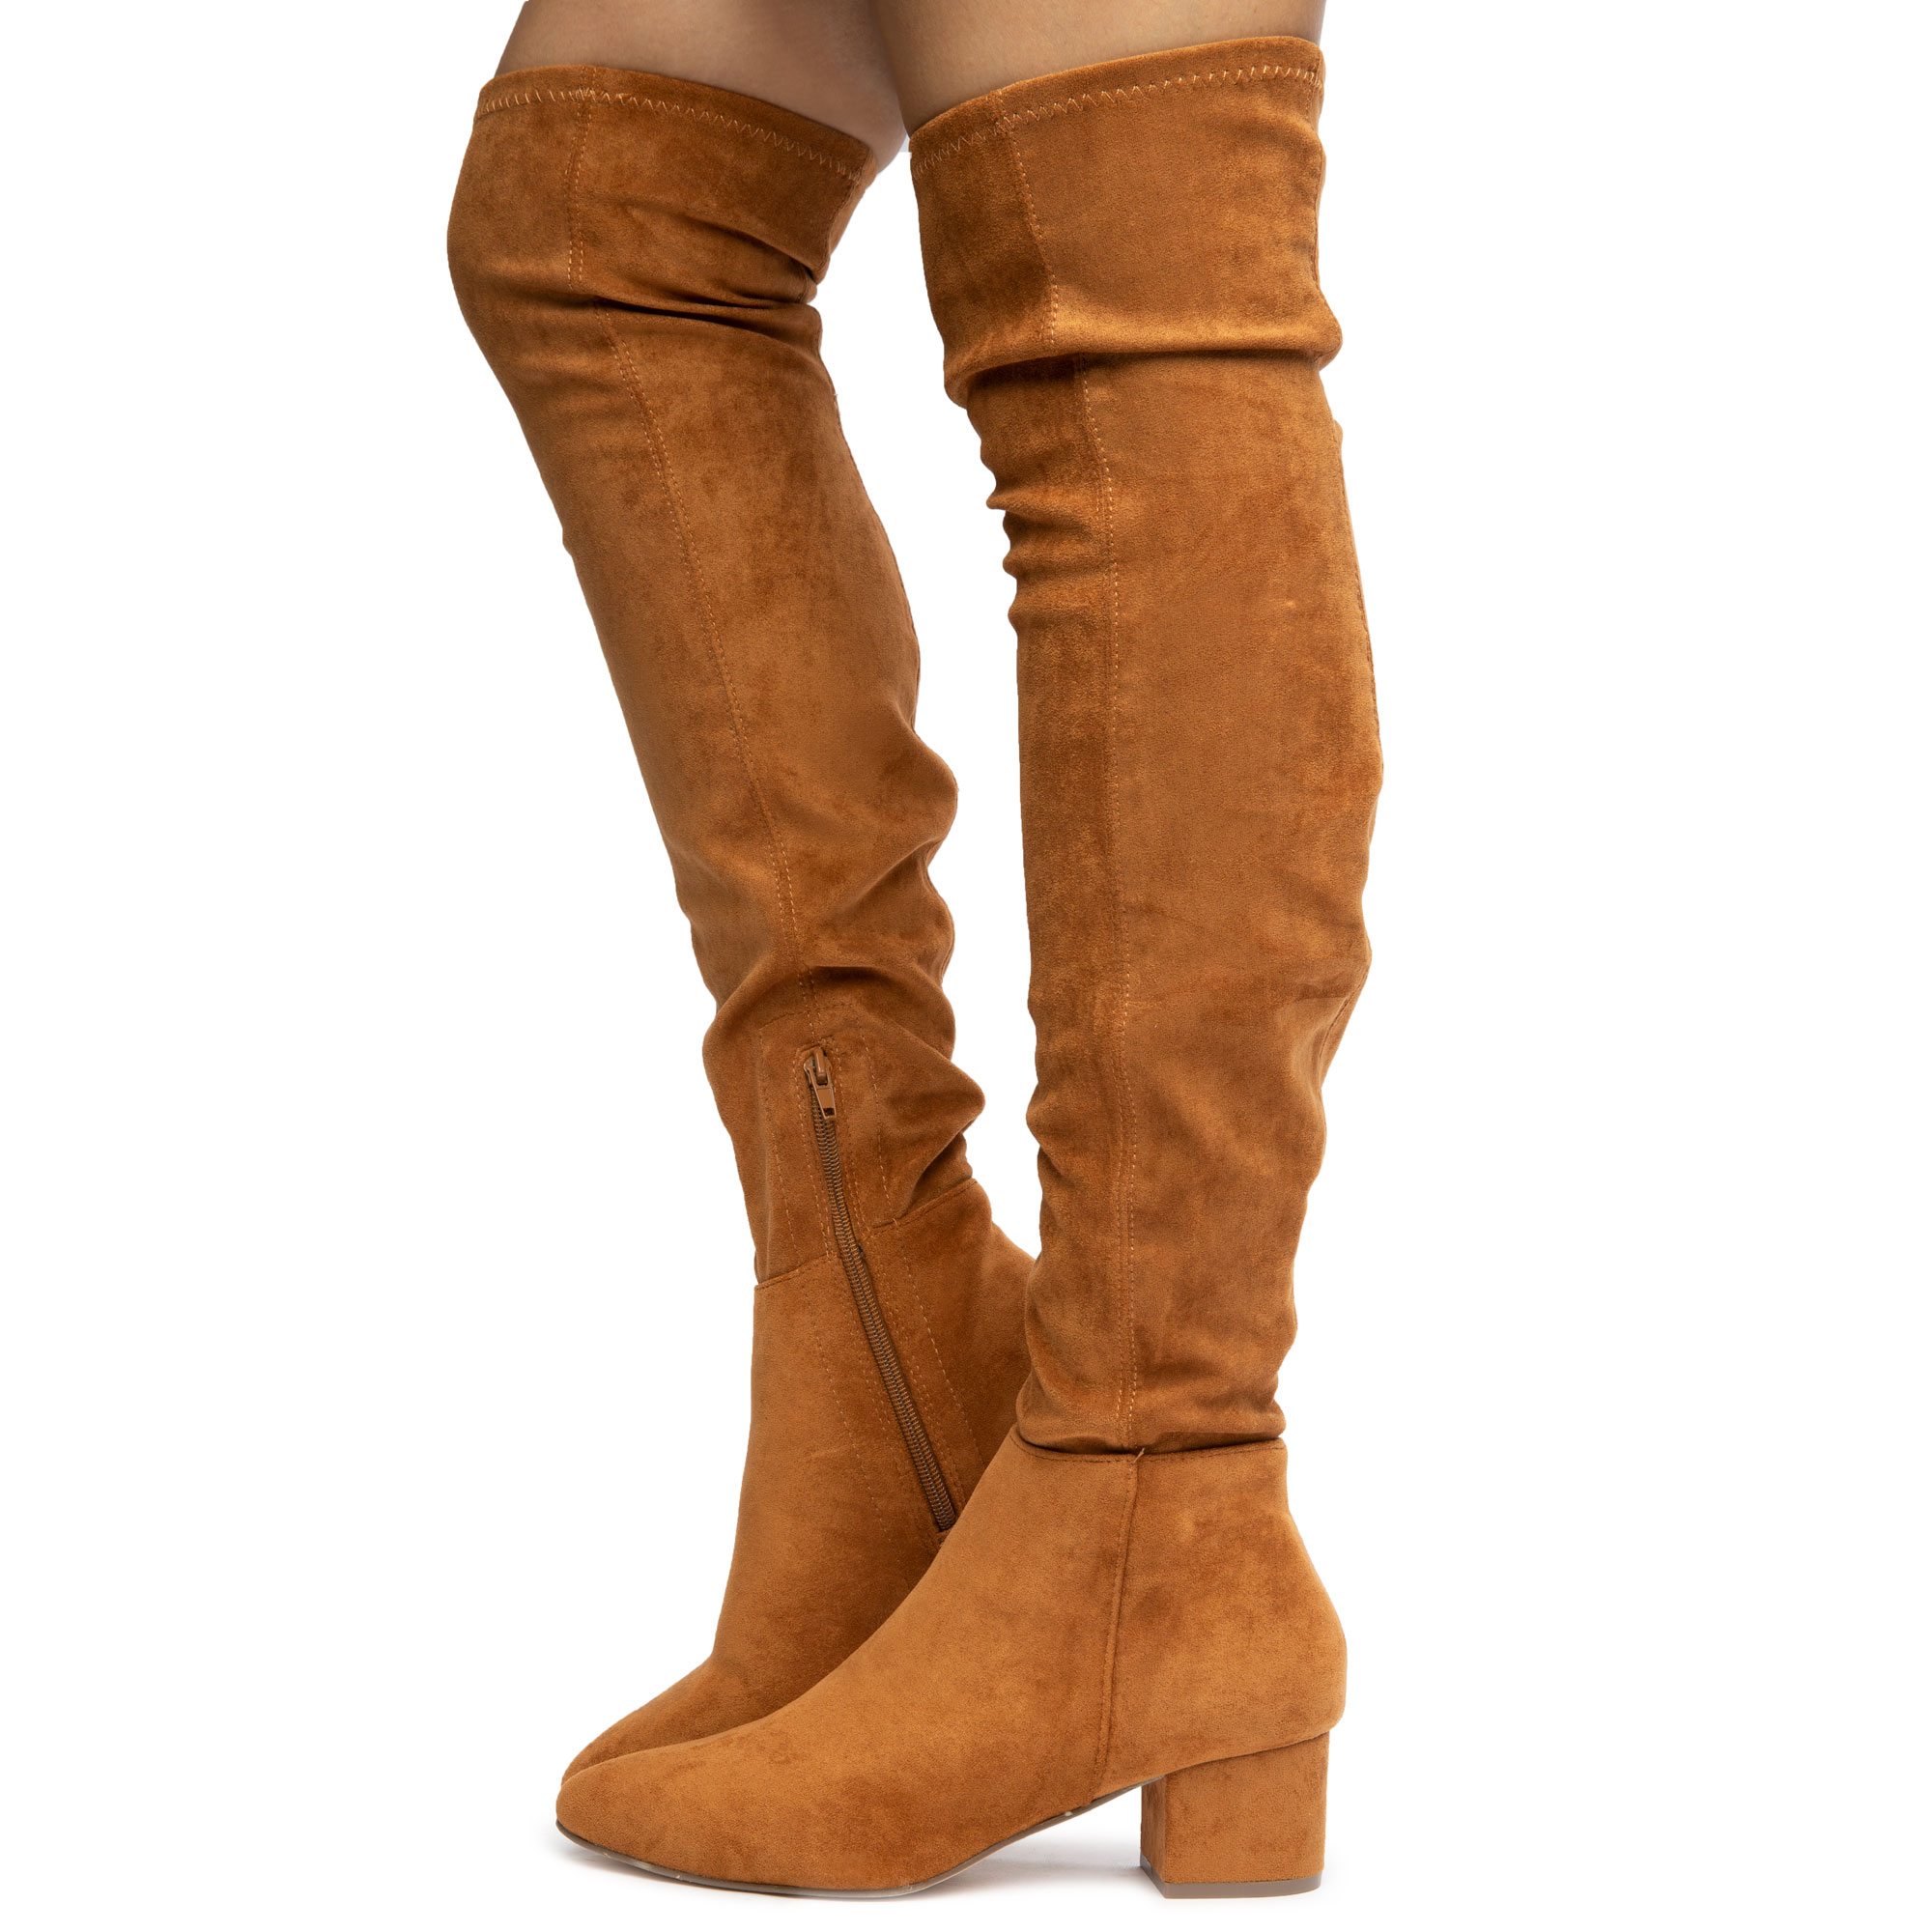 over the knee boots tan